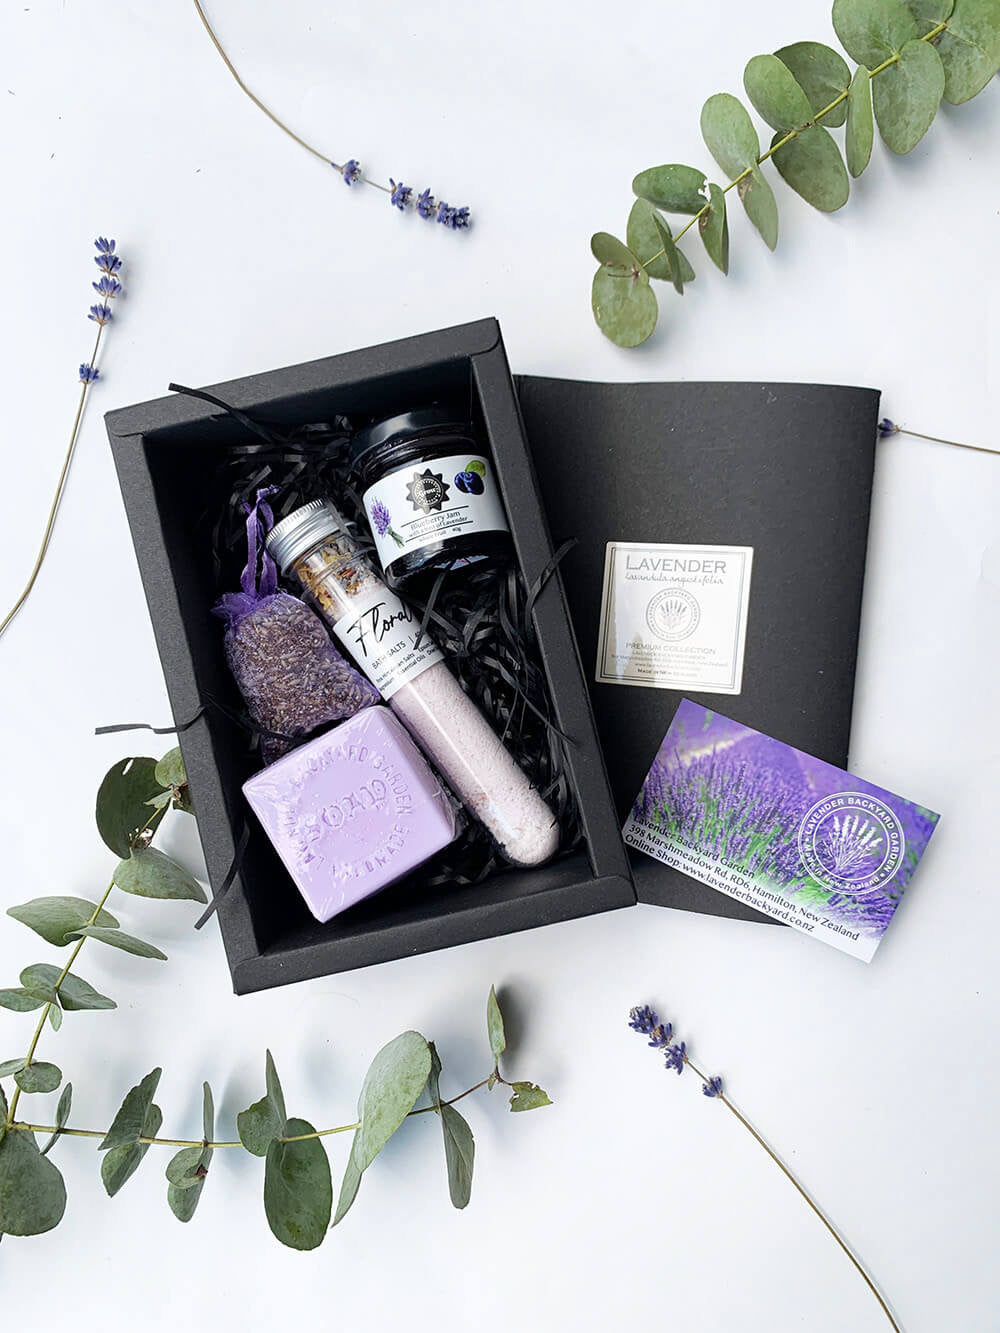 Oh Goodies! Small Lavender Gift Boxes, NZ Lavender Gift Idea